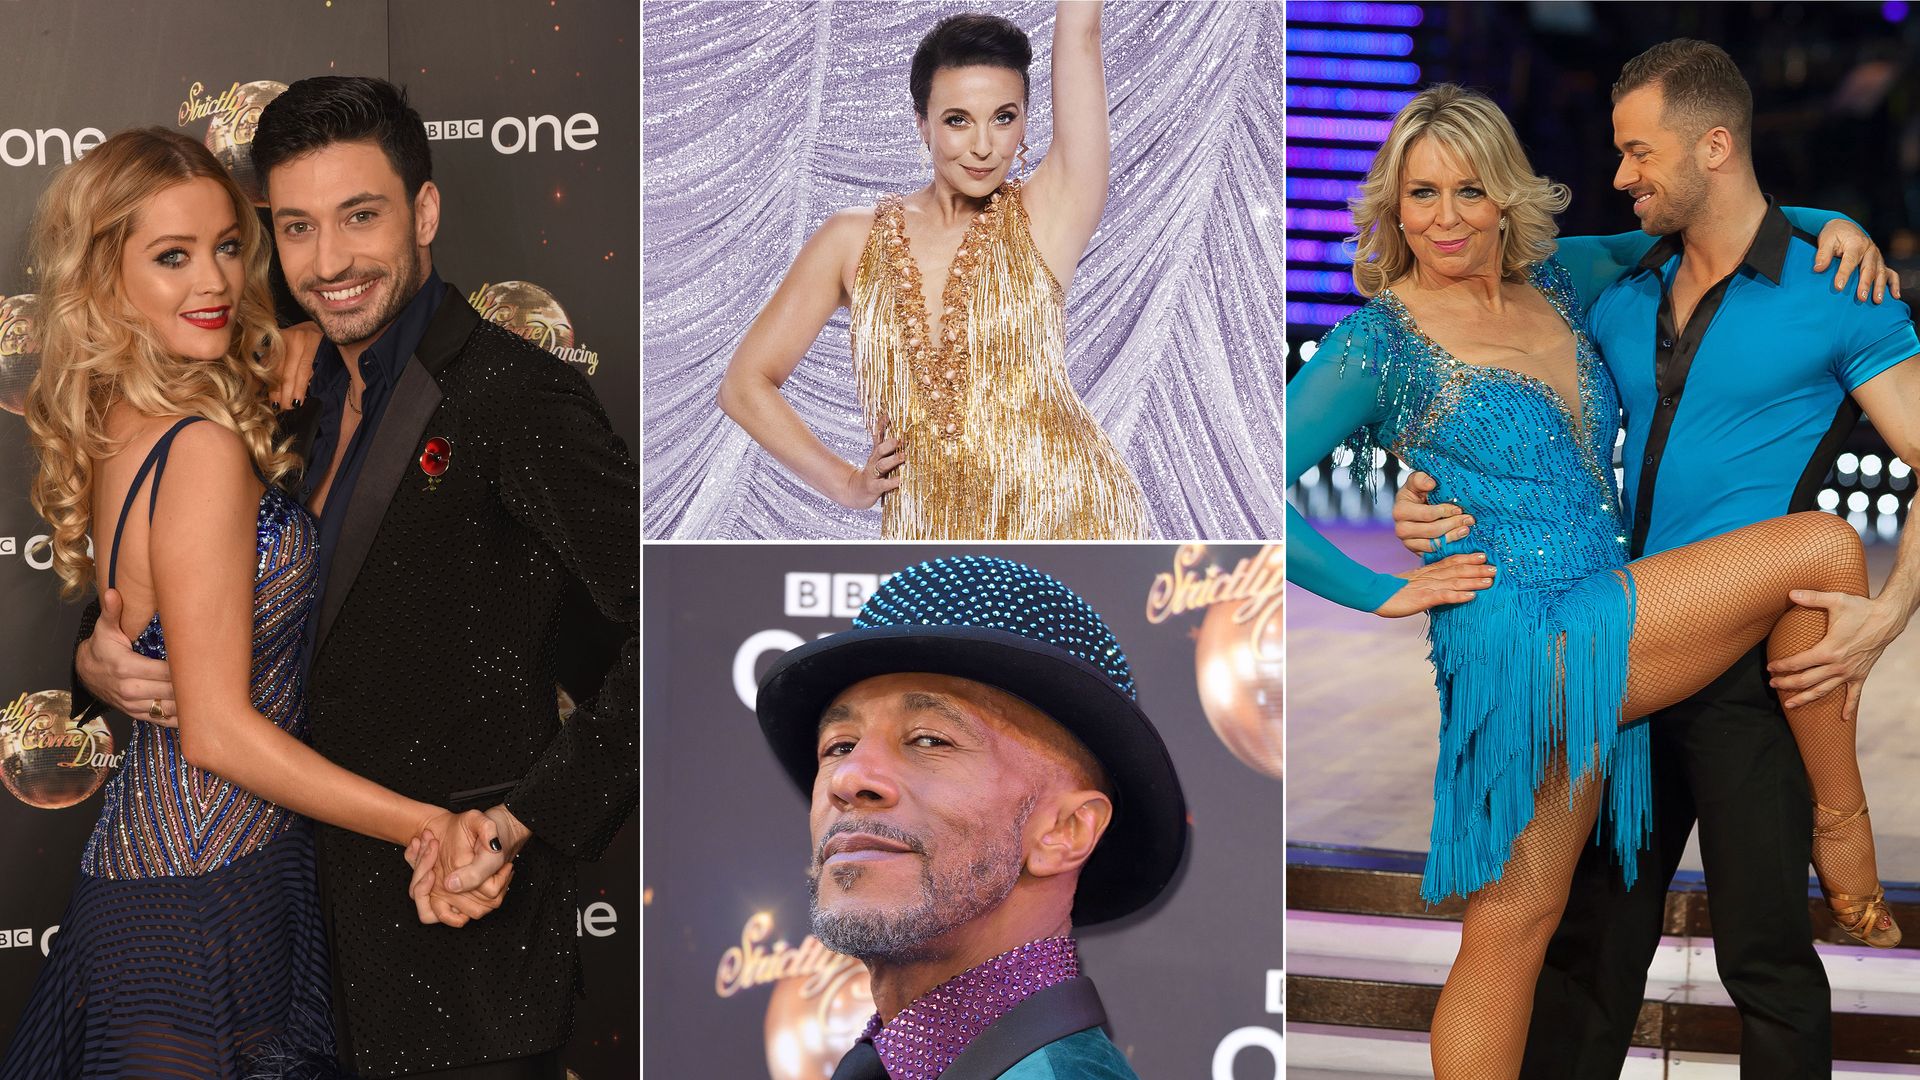 The Strictly stars that have hated their time on the show